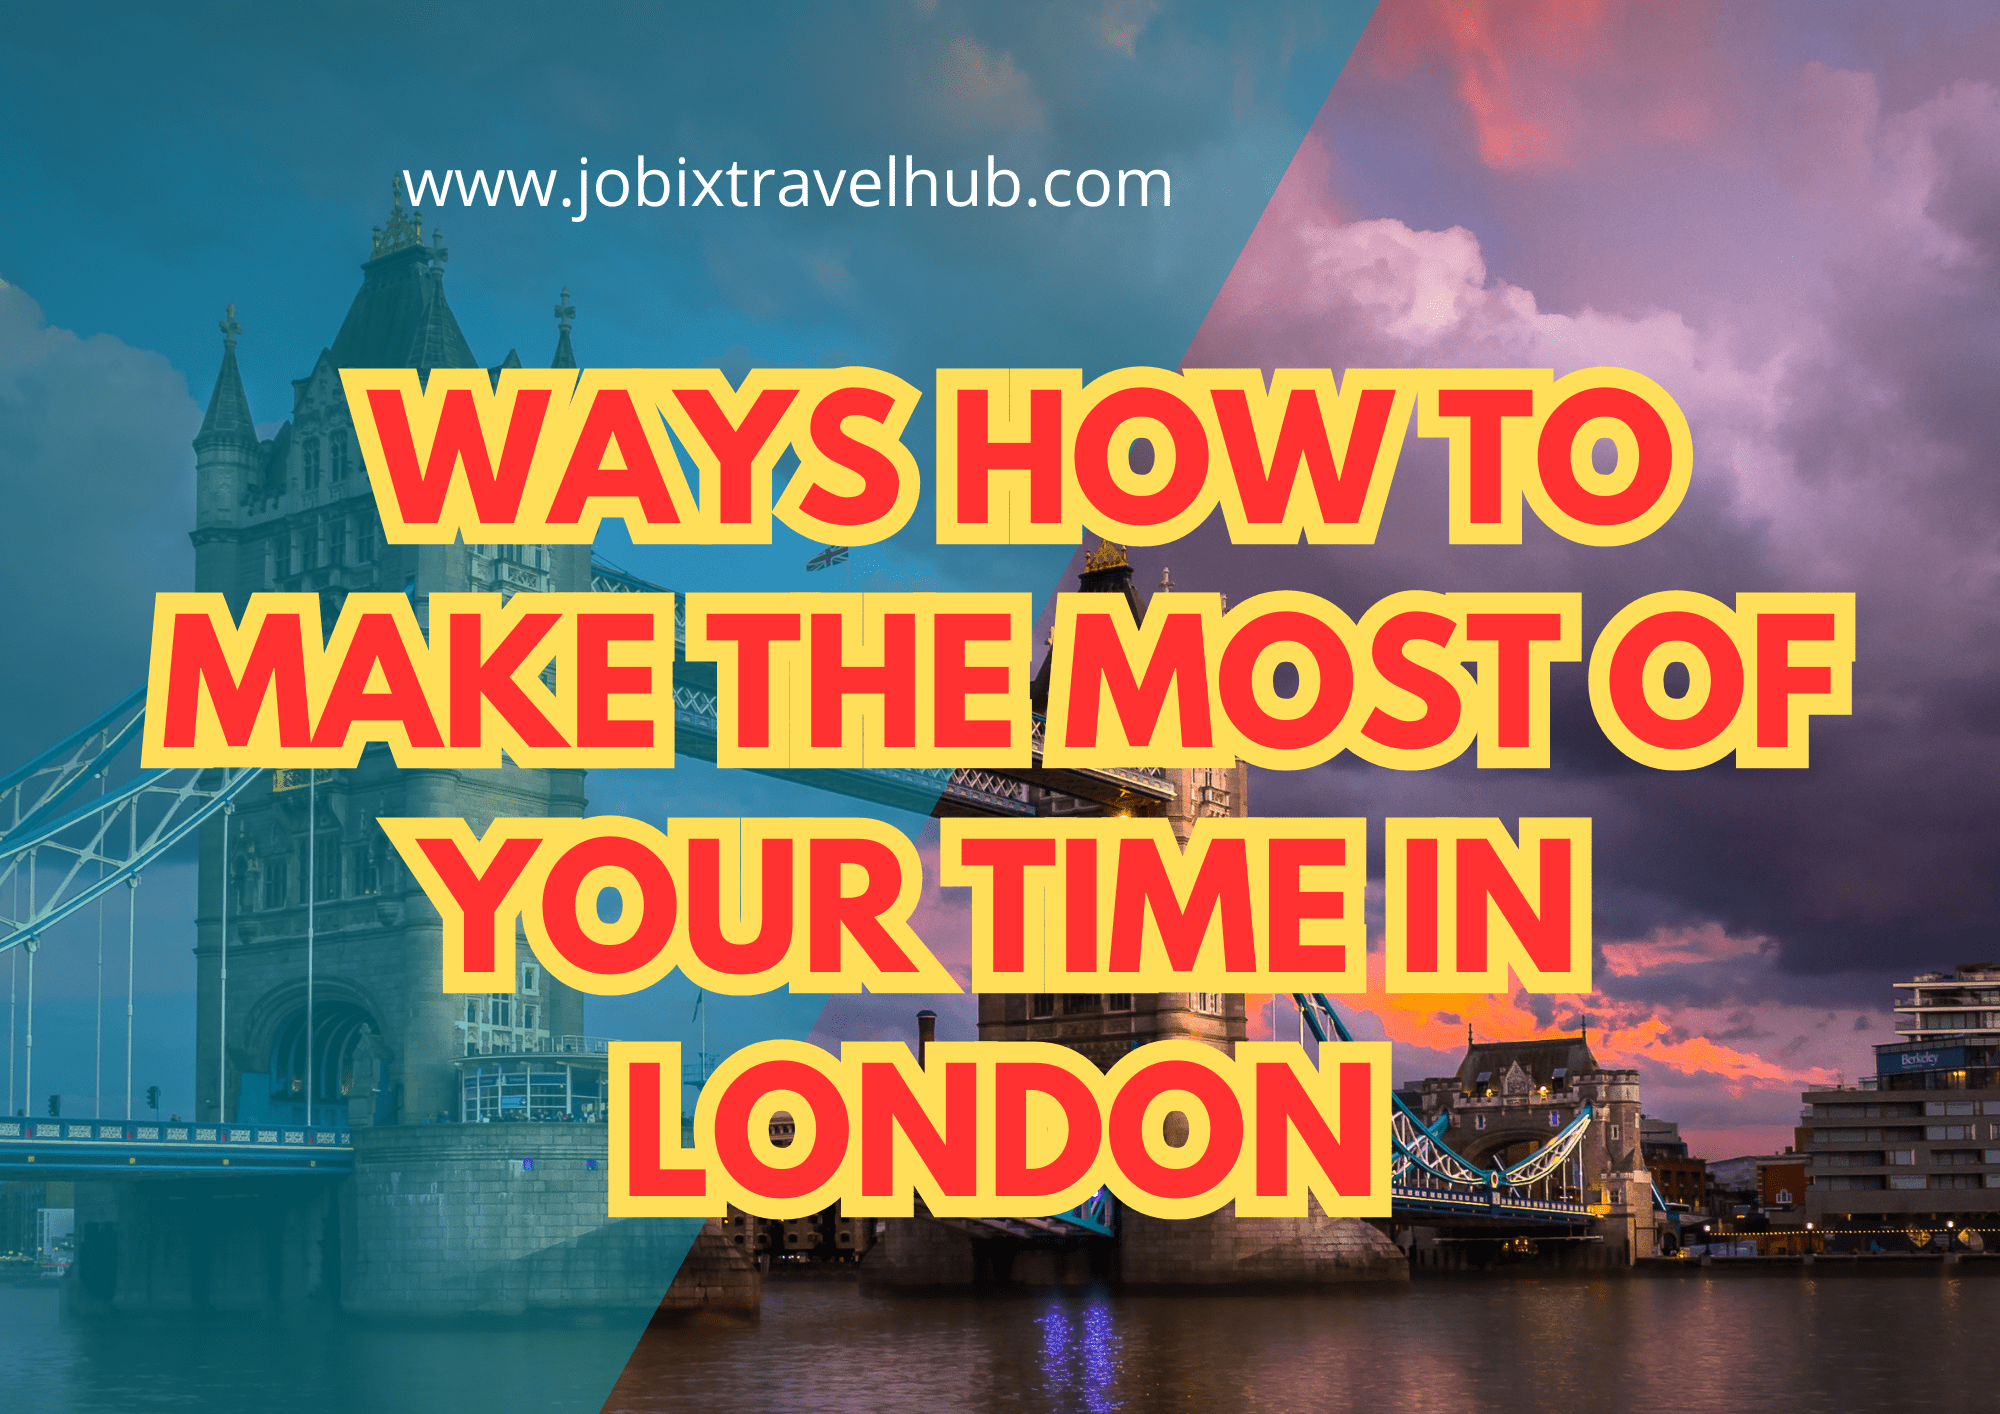  Best Ways How To Make The Most Of Your Time in London Are you looking for the best tips for making the most of your time in London? Look what we have got you! With all the information you need to ensure you get the best out of your London adventure. 